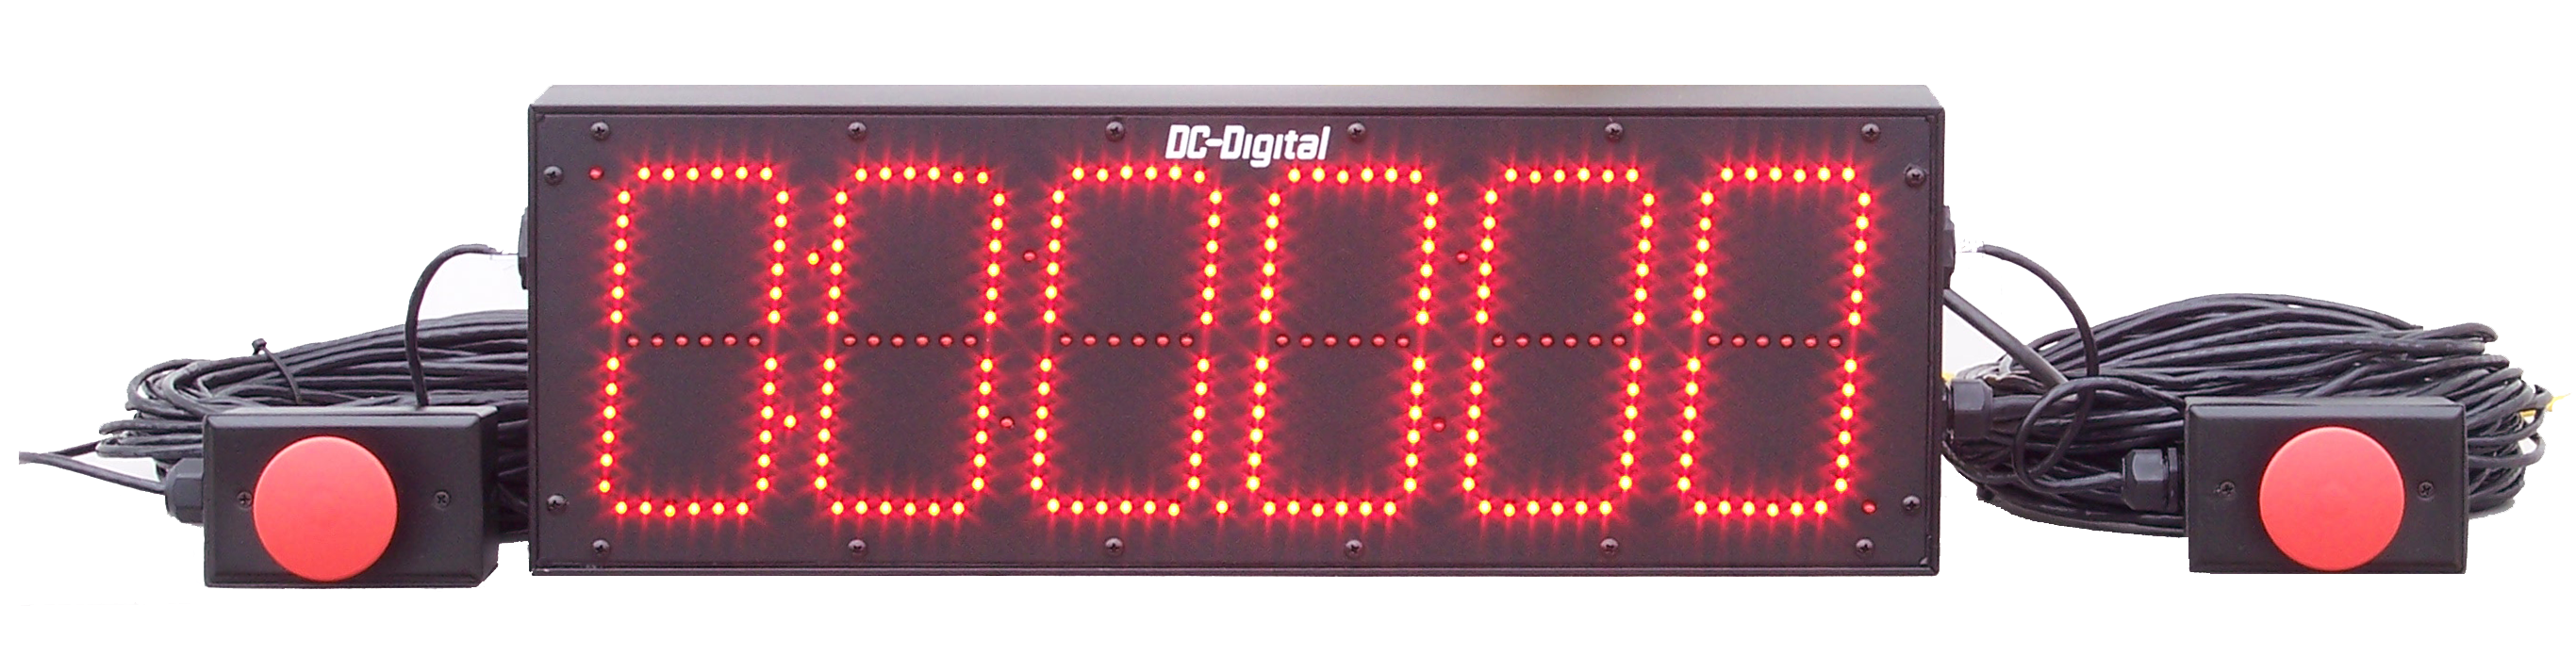 Large 6 Digit Competition Timer with Dual Controls and thousandths of a seconds display